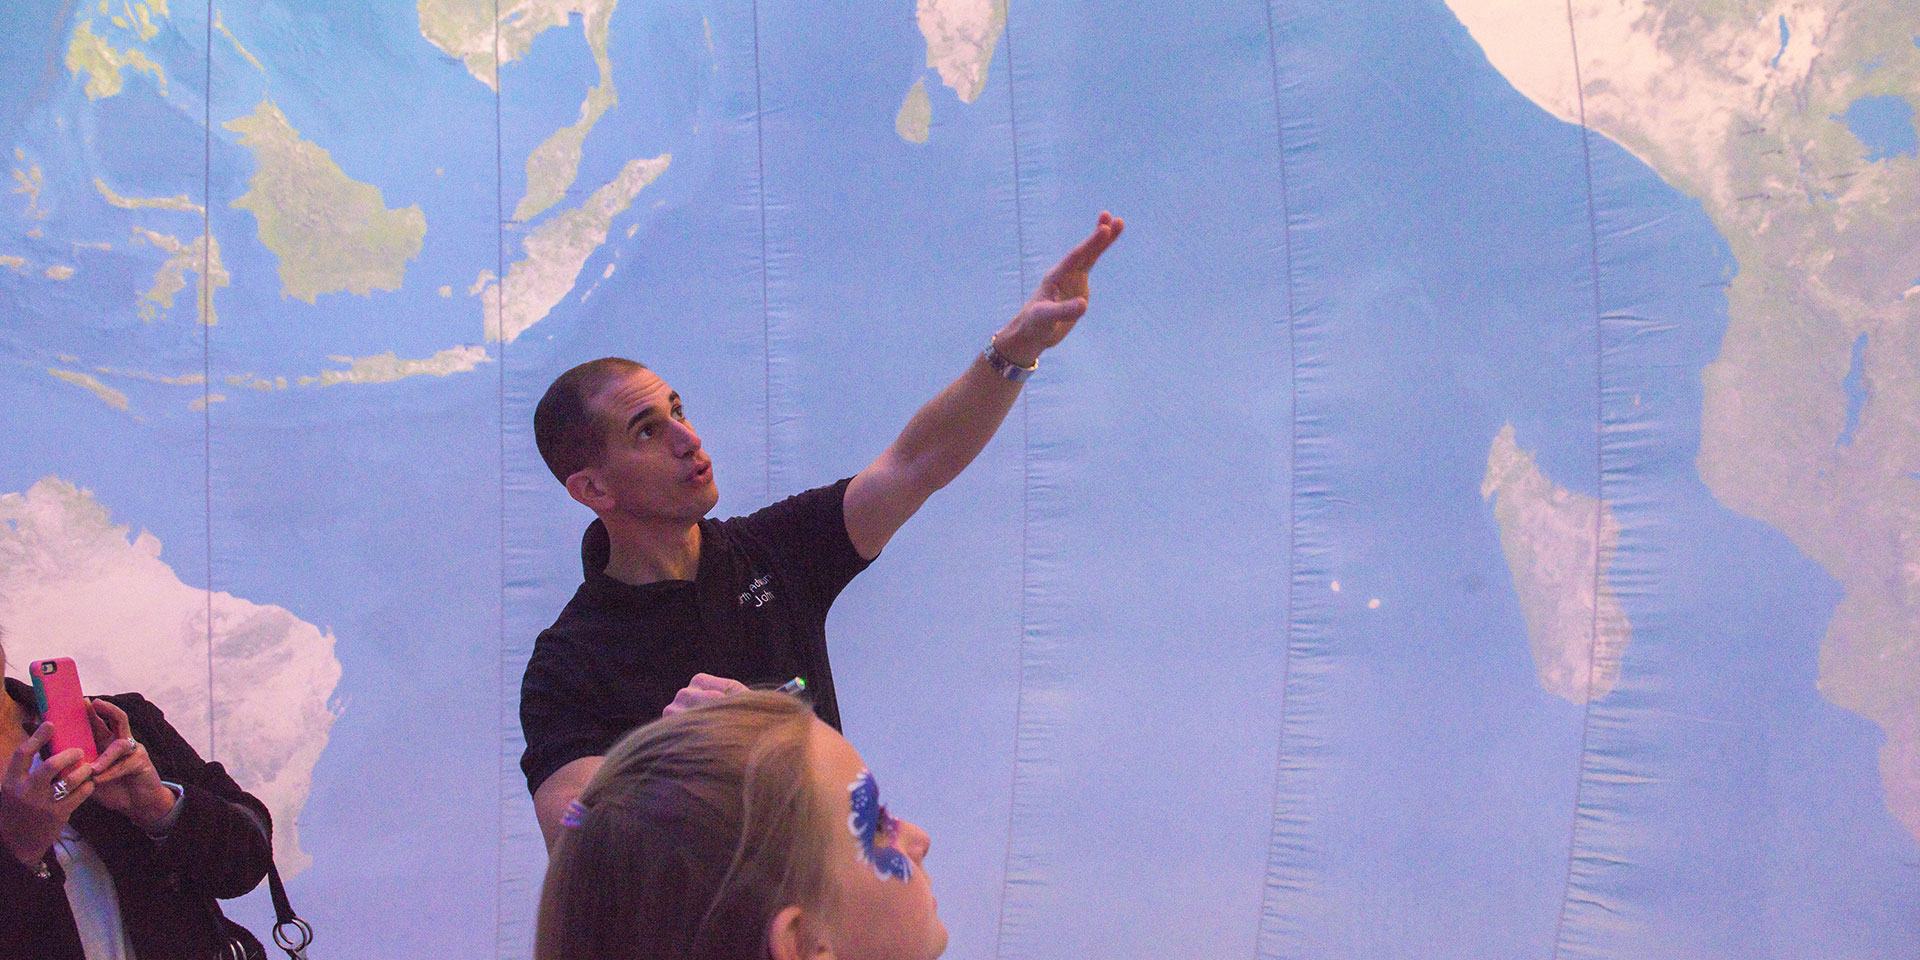 A professor standing inside an inflatable globe points to a part of the map for a group of students